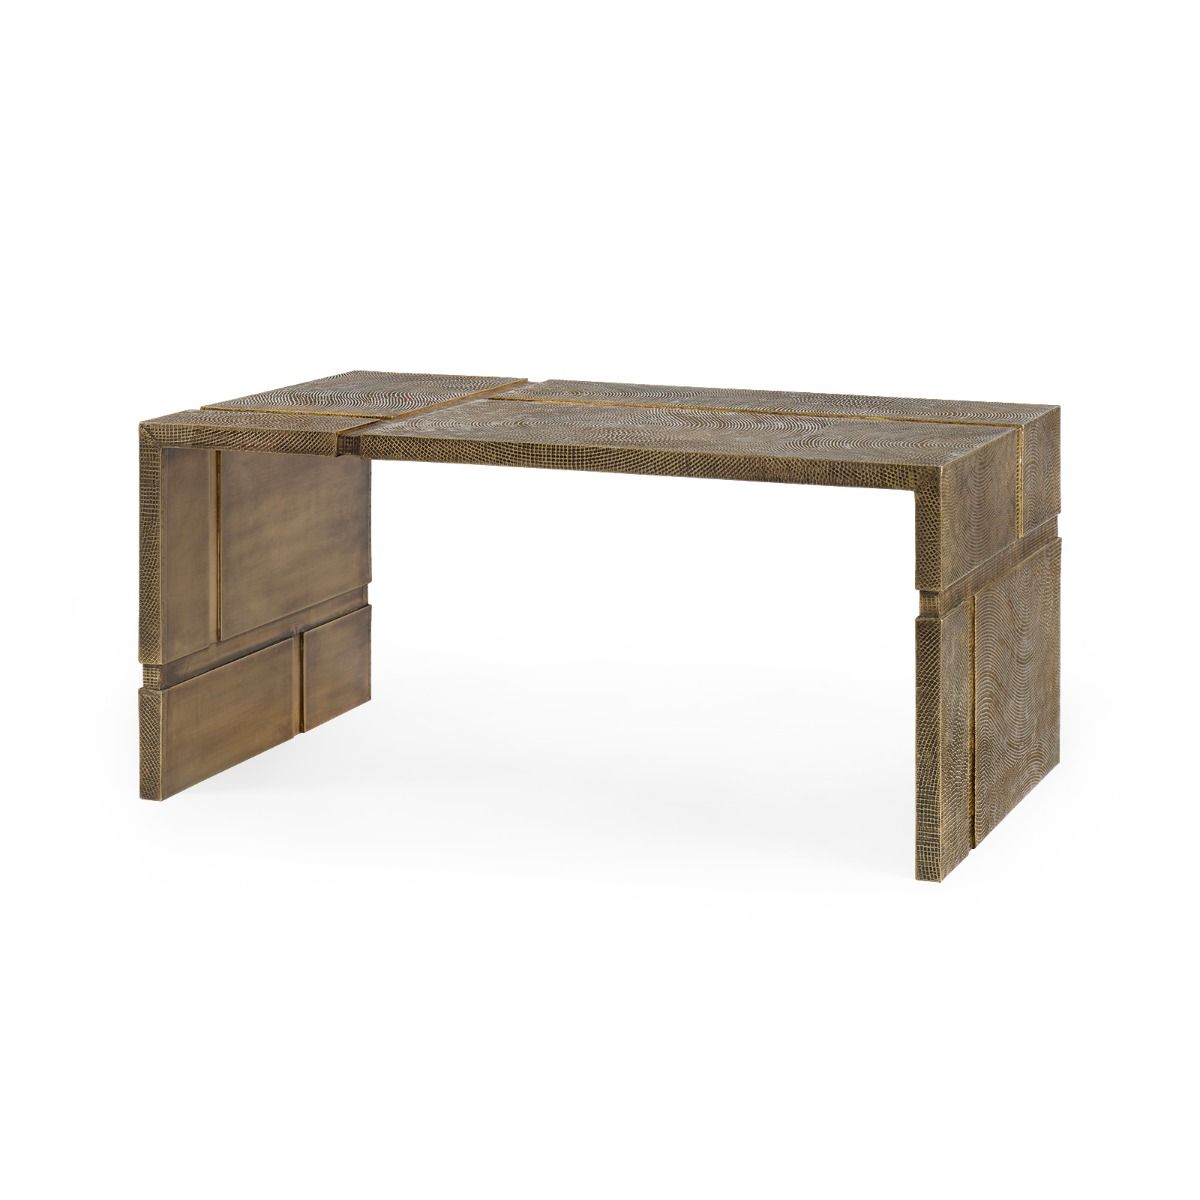 Load image into Gallery viewer, Hollis Coffee Table, Brass Table Bungalow 5     Four Hands, Burke Decor, Mid Century Modern Furniture, Old Bones Furniture Company, Old Bones Co, Modern Mid Century, Designer Furniture, https://www.oldbonesco.com/
